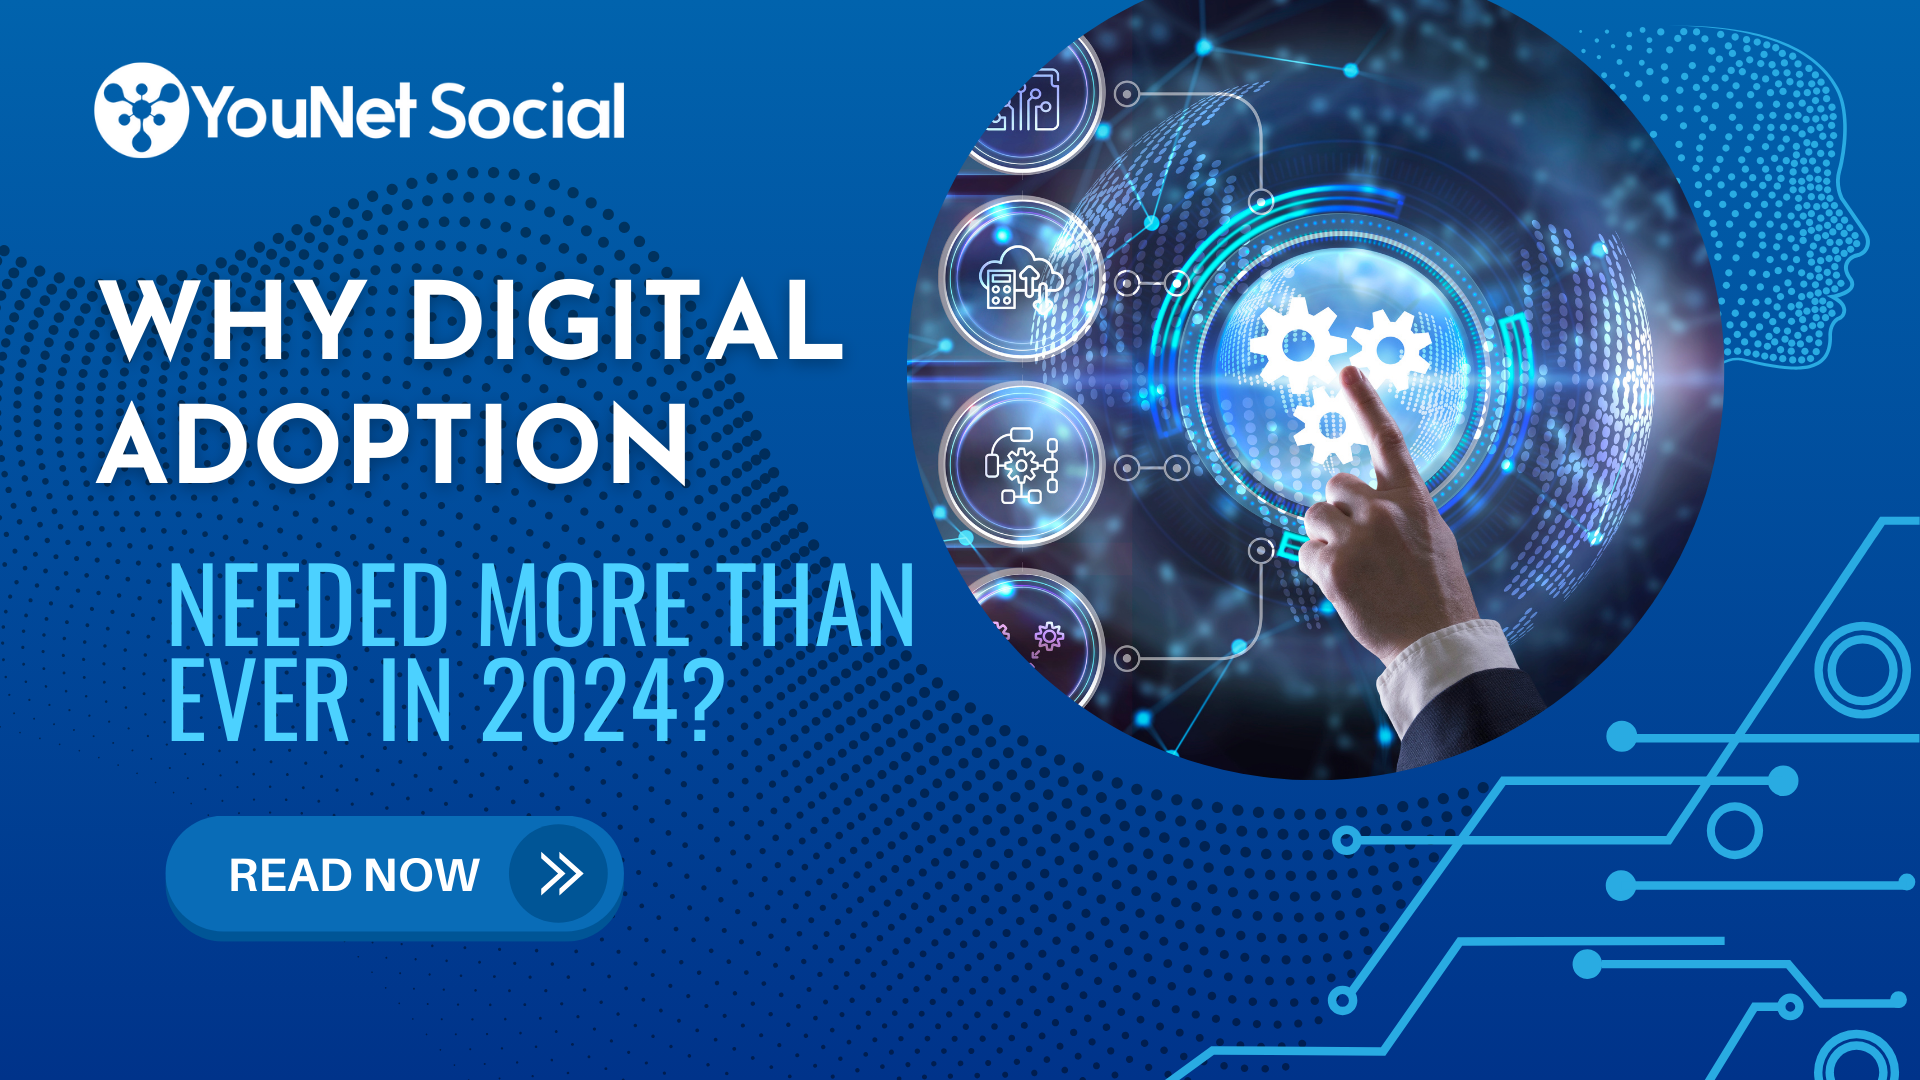 Why is digital adoption needed for business in 2024?